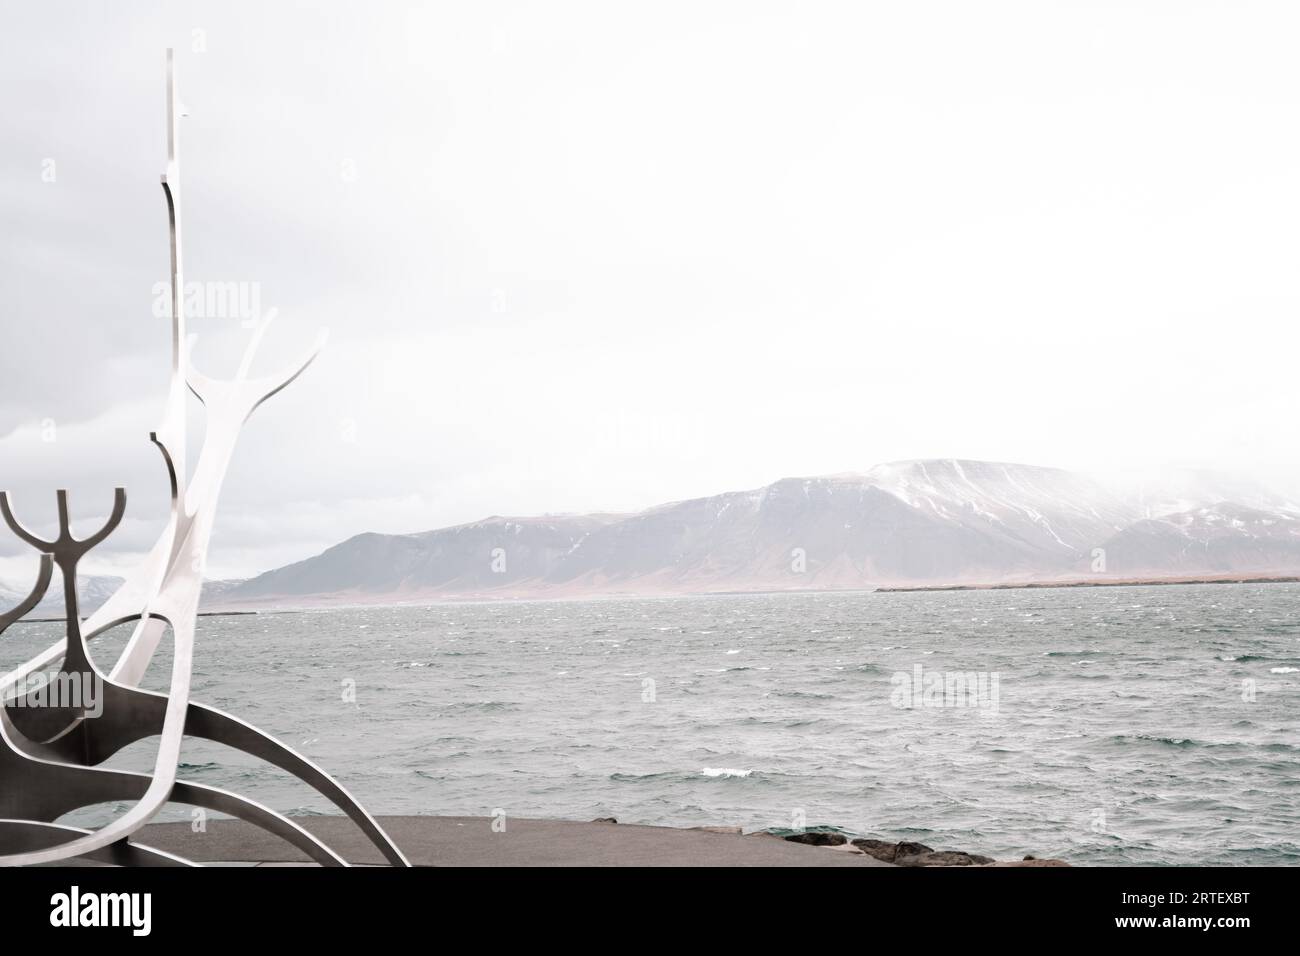 Iconic 'Sun Voyager' sculpture in Reykjavik: a gleaming ship of dreams against the sea's endless horizon. Stock Photo